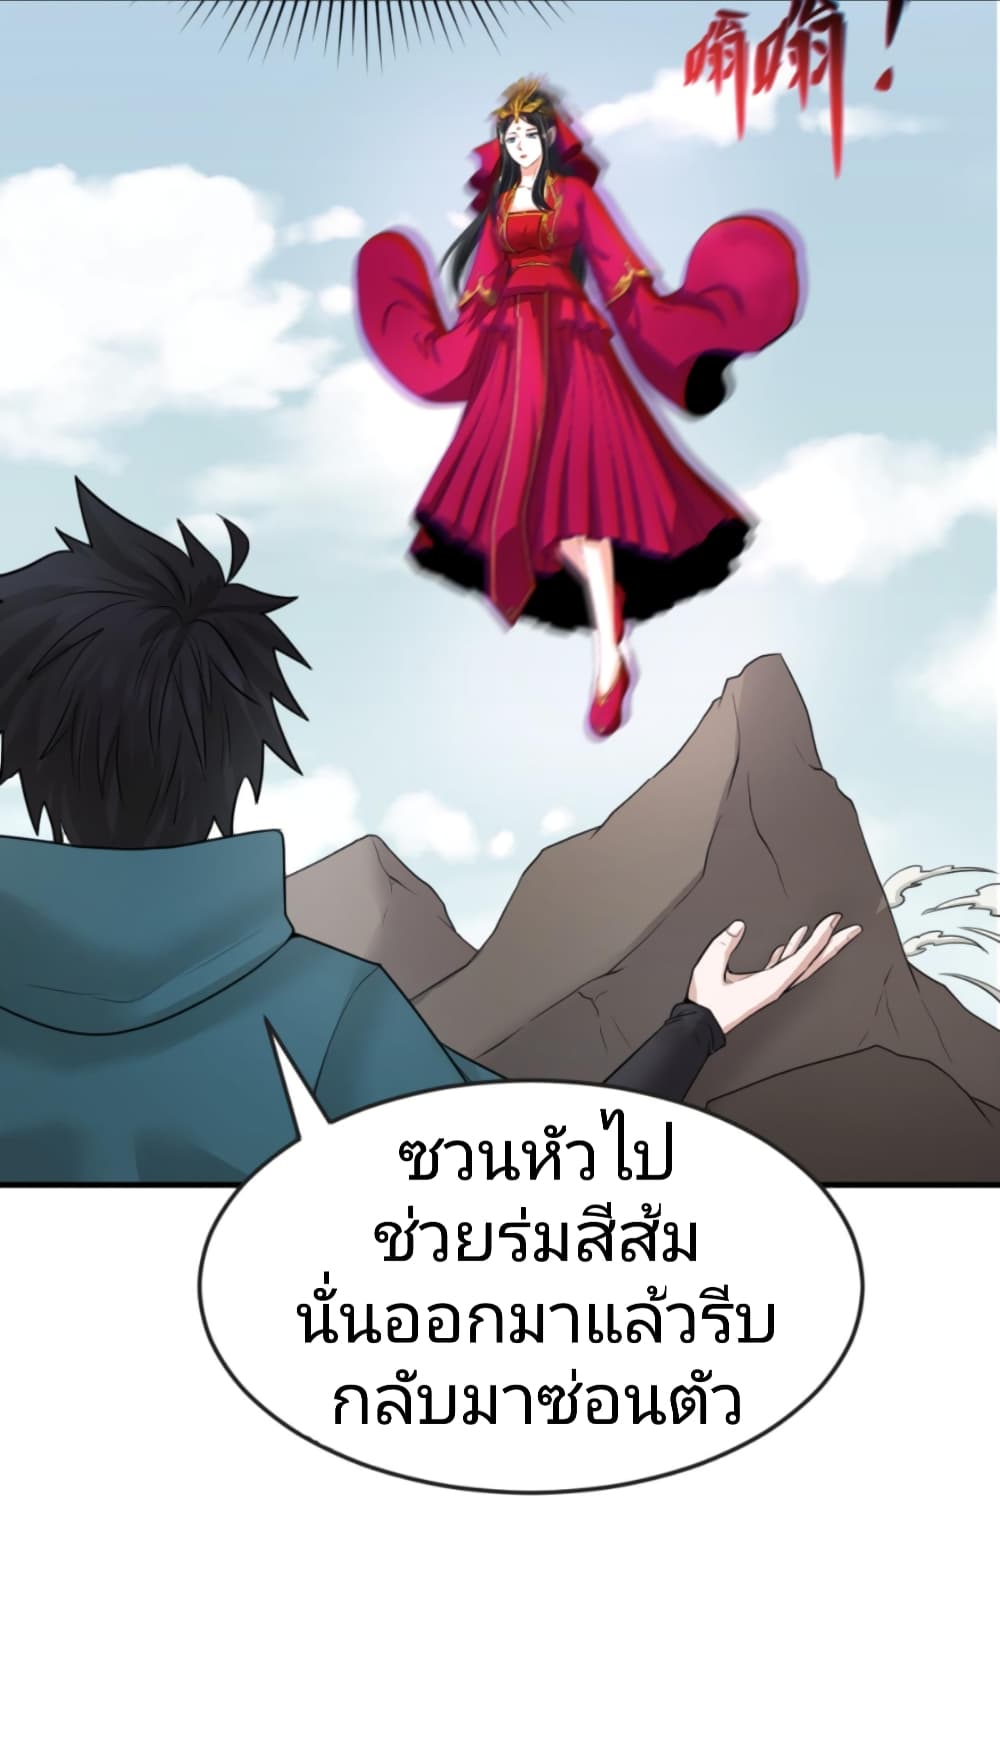 The Age of Ghost Spirits à¸à¸­à¸à¸à¸µà¹ 43 (14)